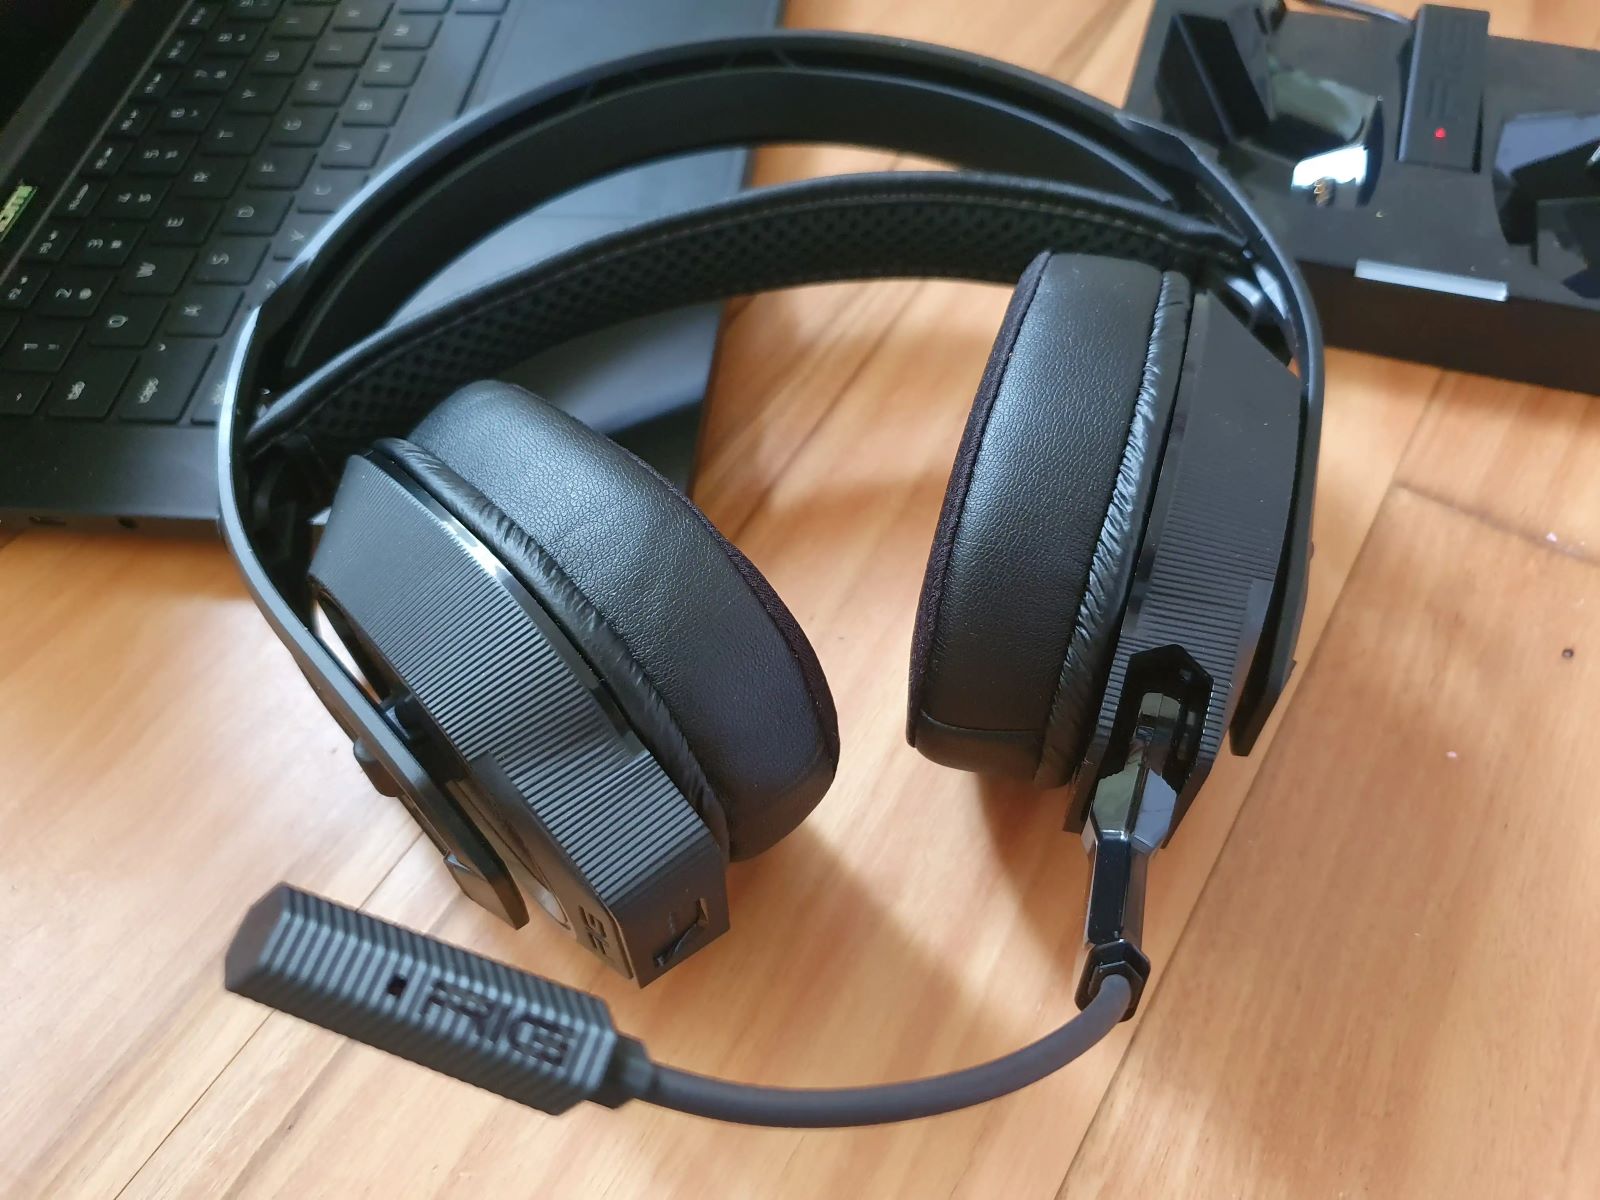 Headset Mic Woes: Troubleshooting And Fixes